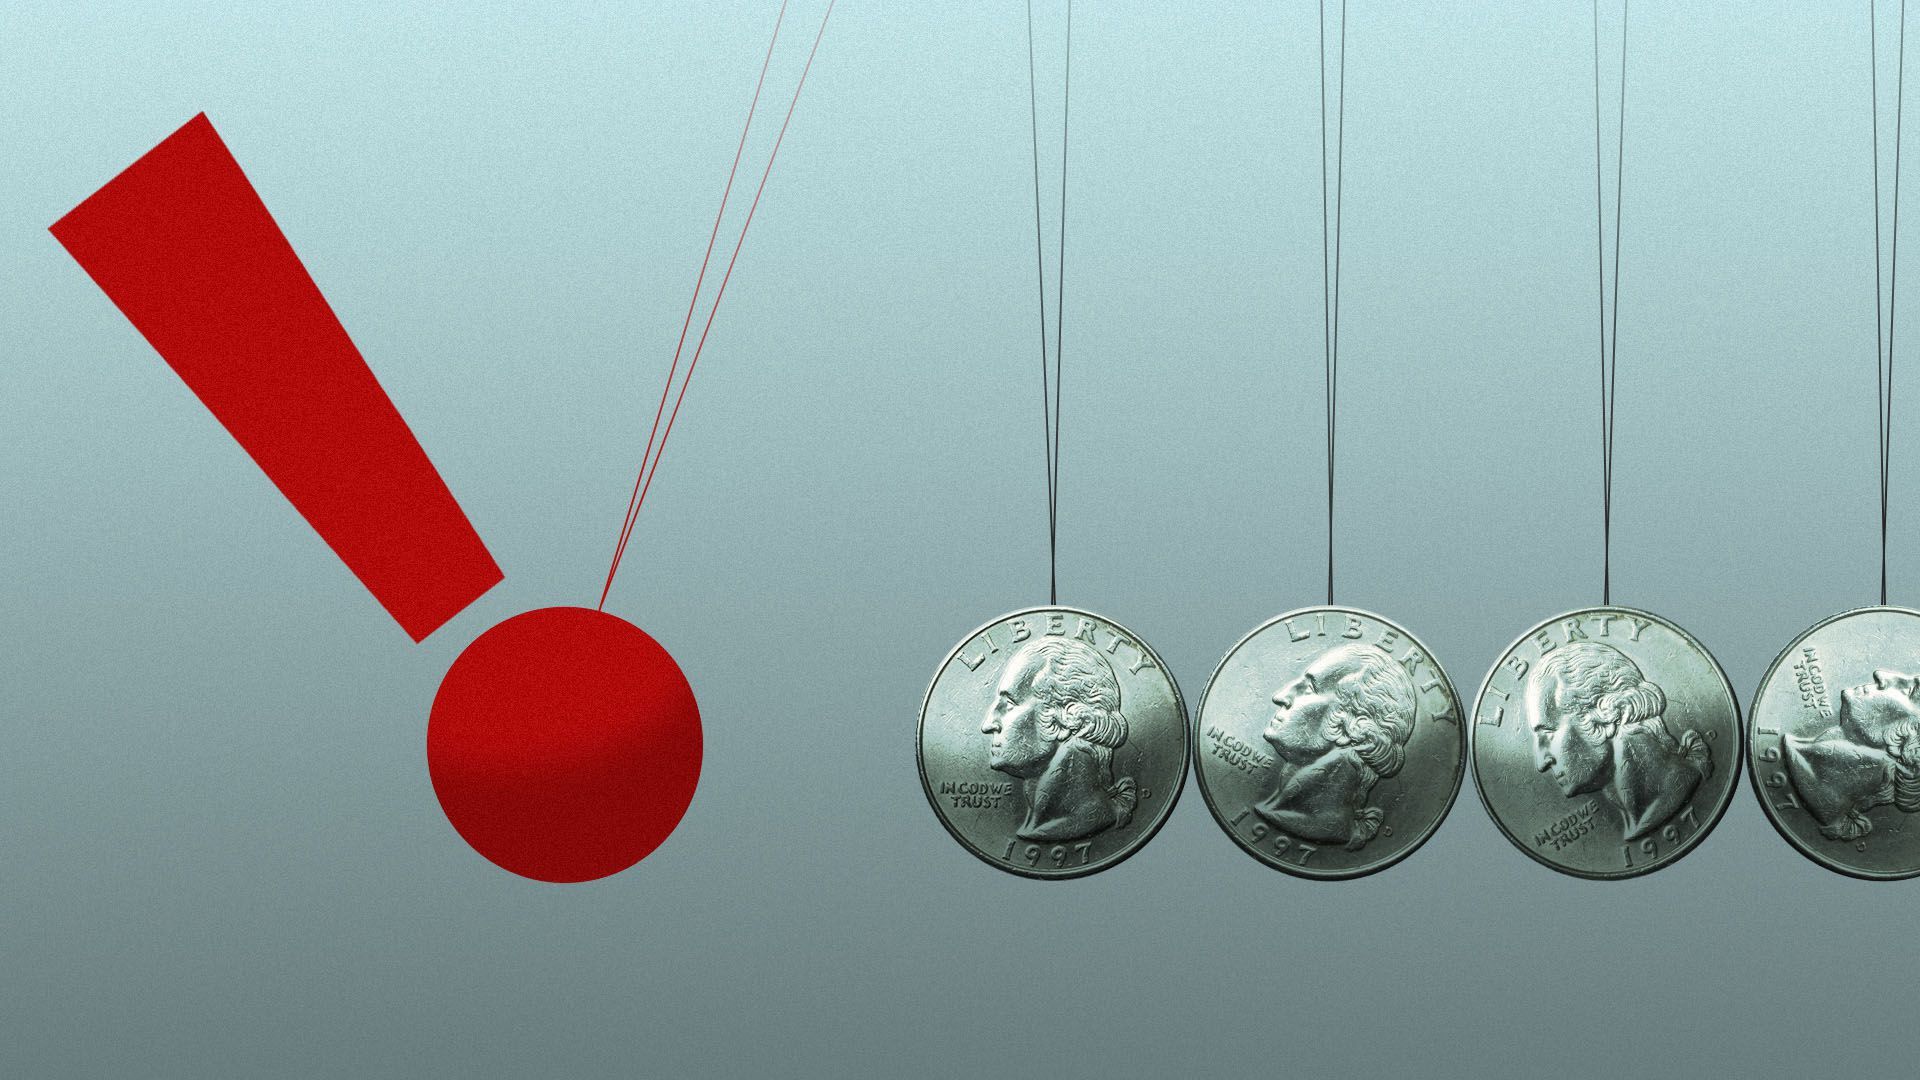 Illustration of a Newton's Cradle made out of quarters, with one about to hit the rest shaped like an exclamation point